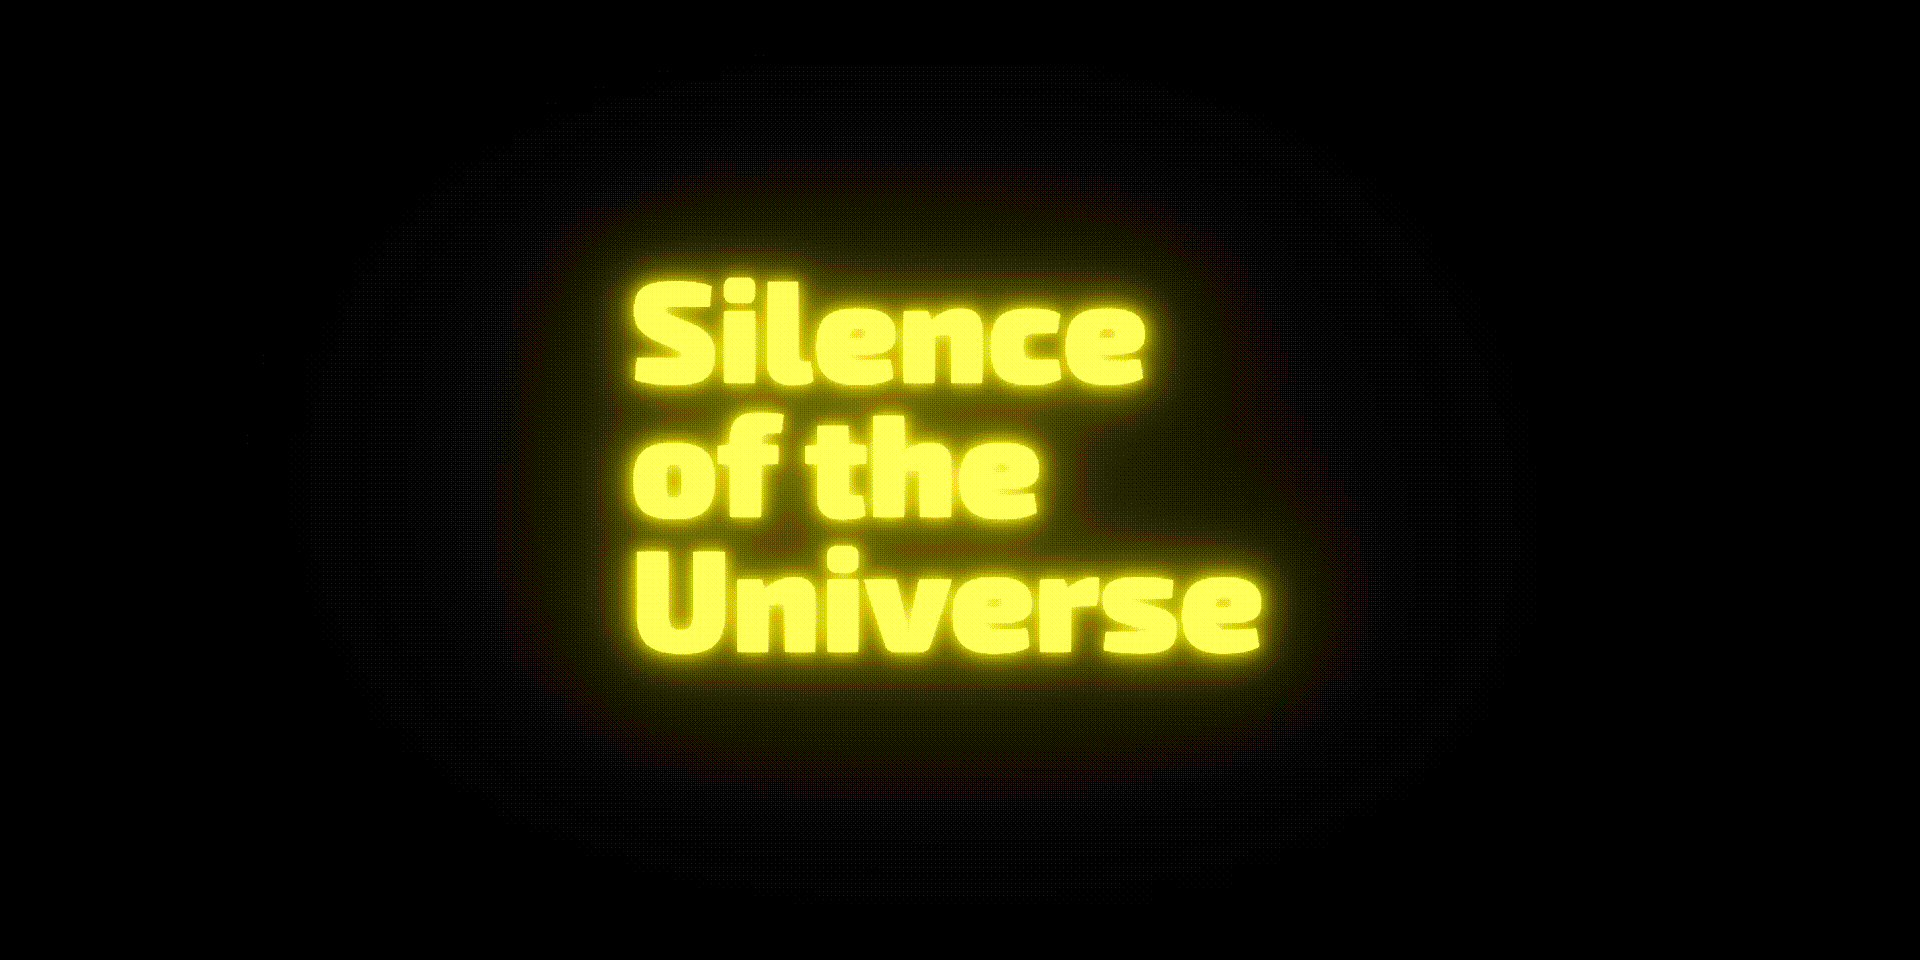 Silence of the Universe